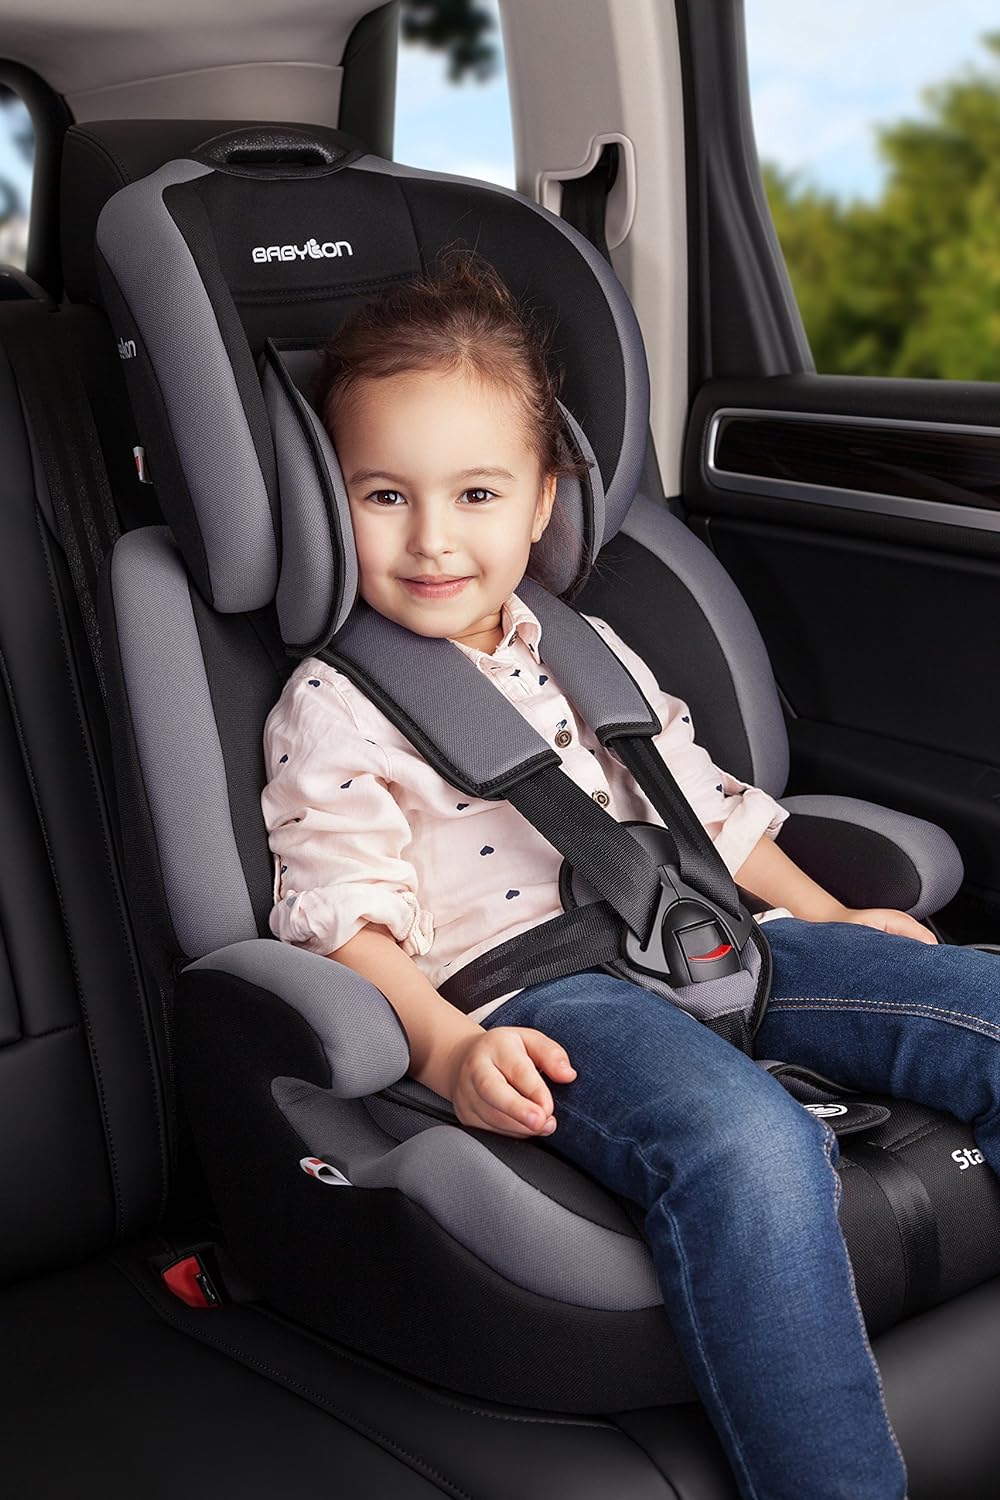 Babylon Star ISOFIX Child Car Seat Group 1/2/3, 9-36 kg Child Seat with Isofix and Top Tether 5-Point Seat Belt Car Seat Adjustable Headrest ECE R44/04 Grey